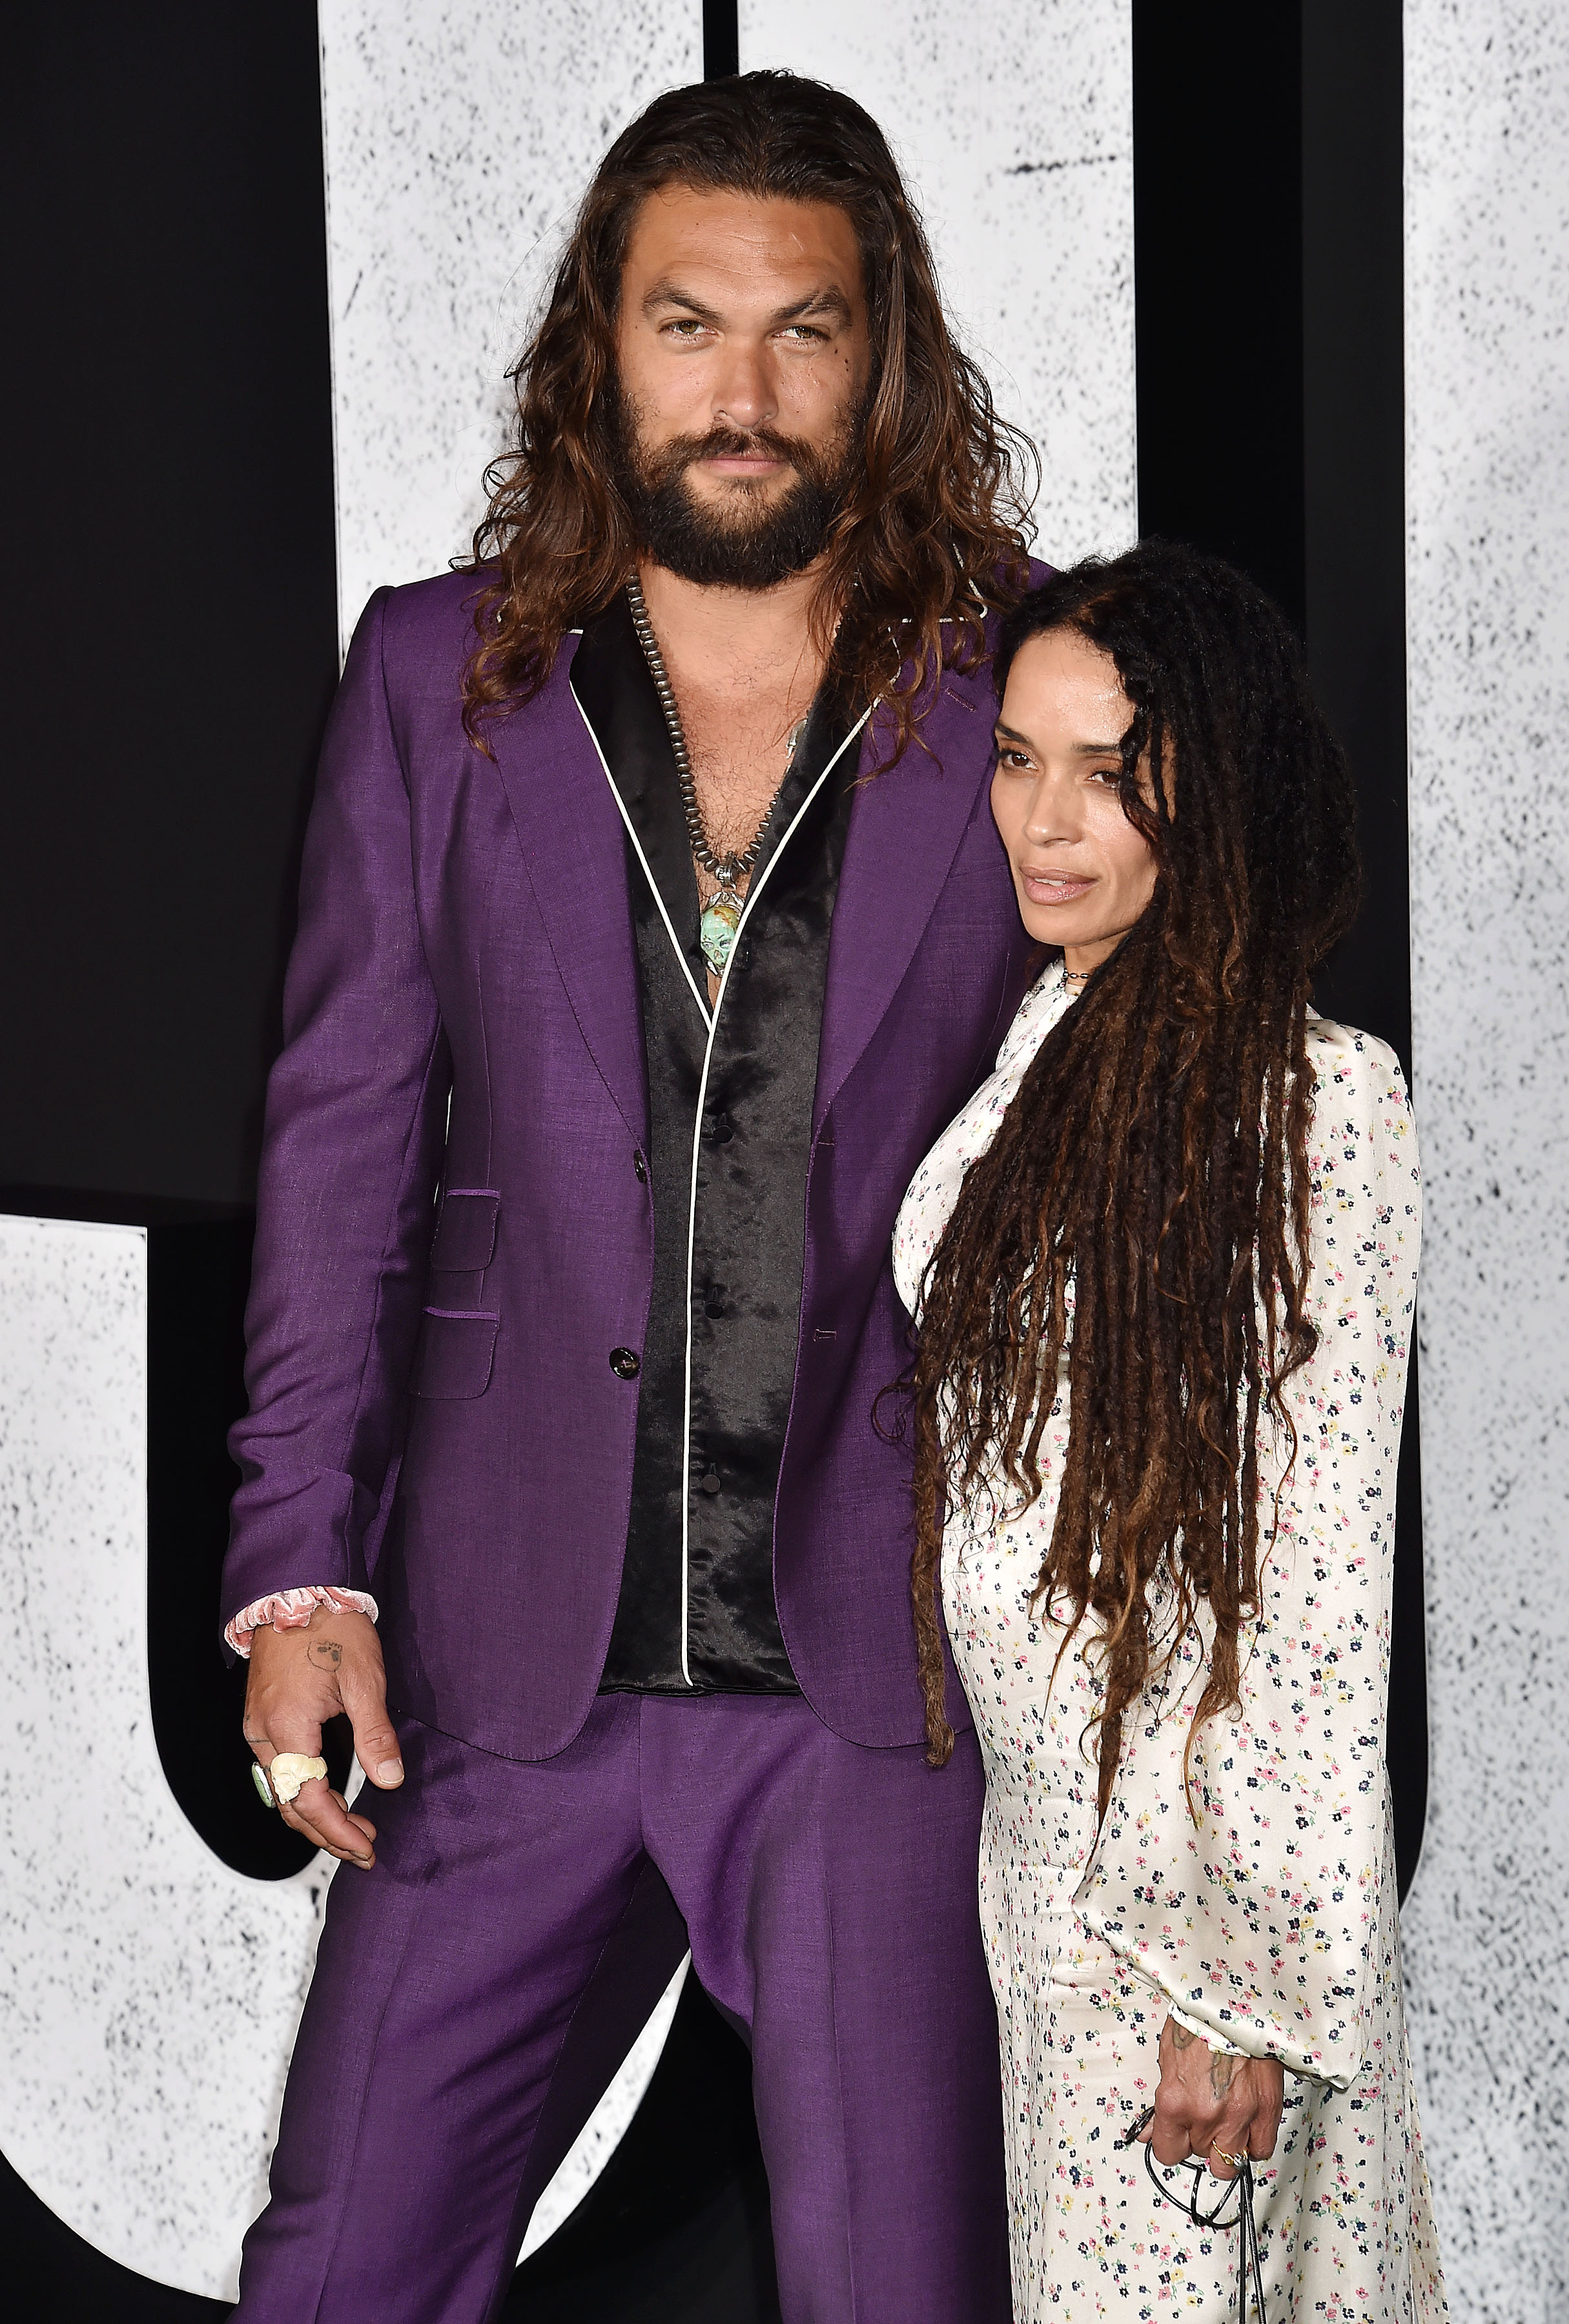 Jason Momoa Says He And Lisa Were "Starving" After His Early GOT Exit